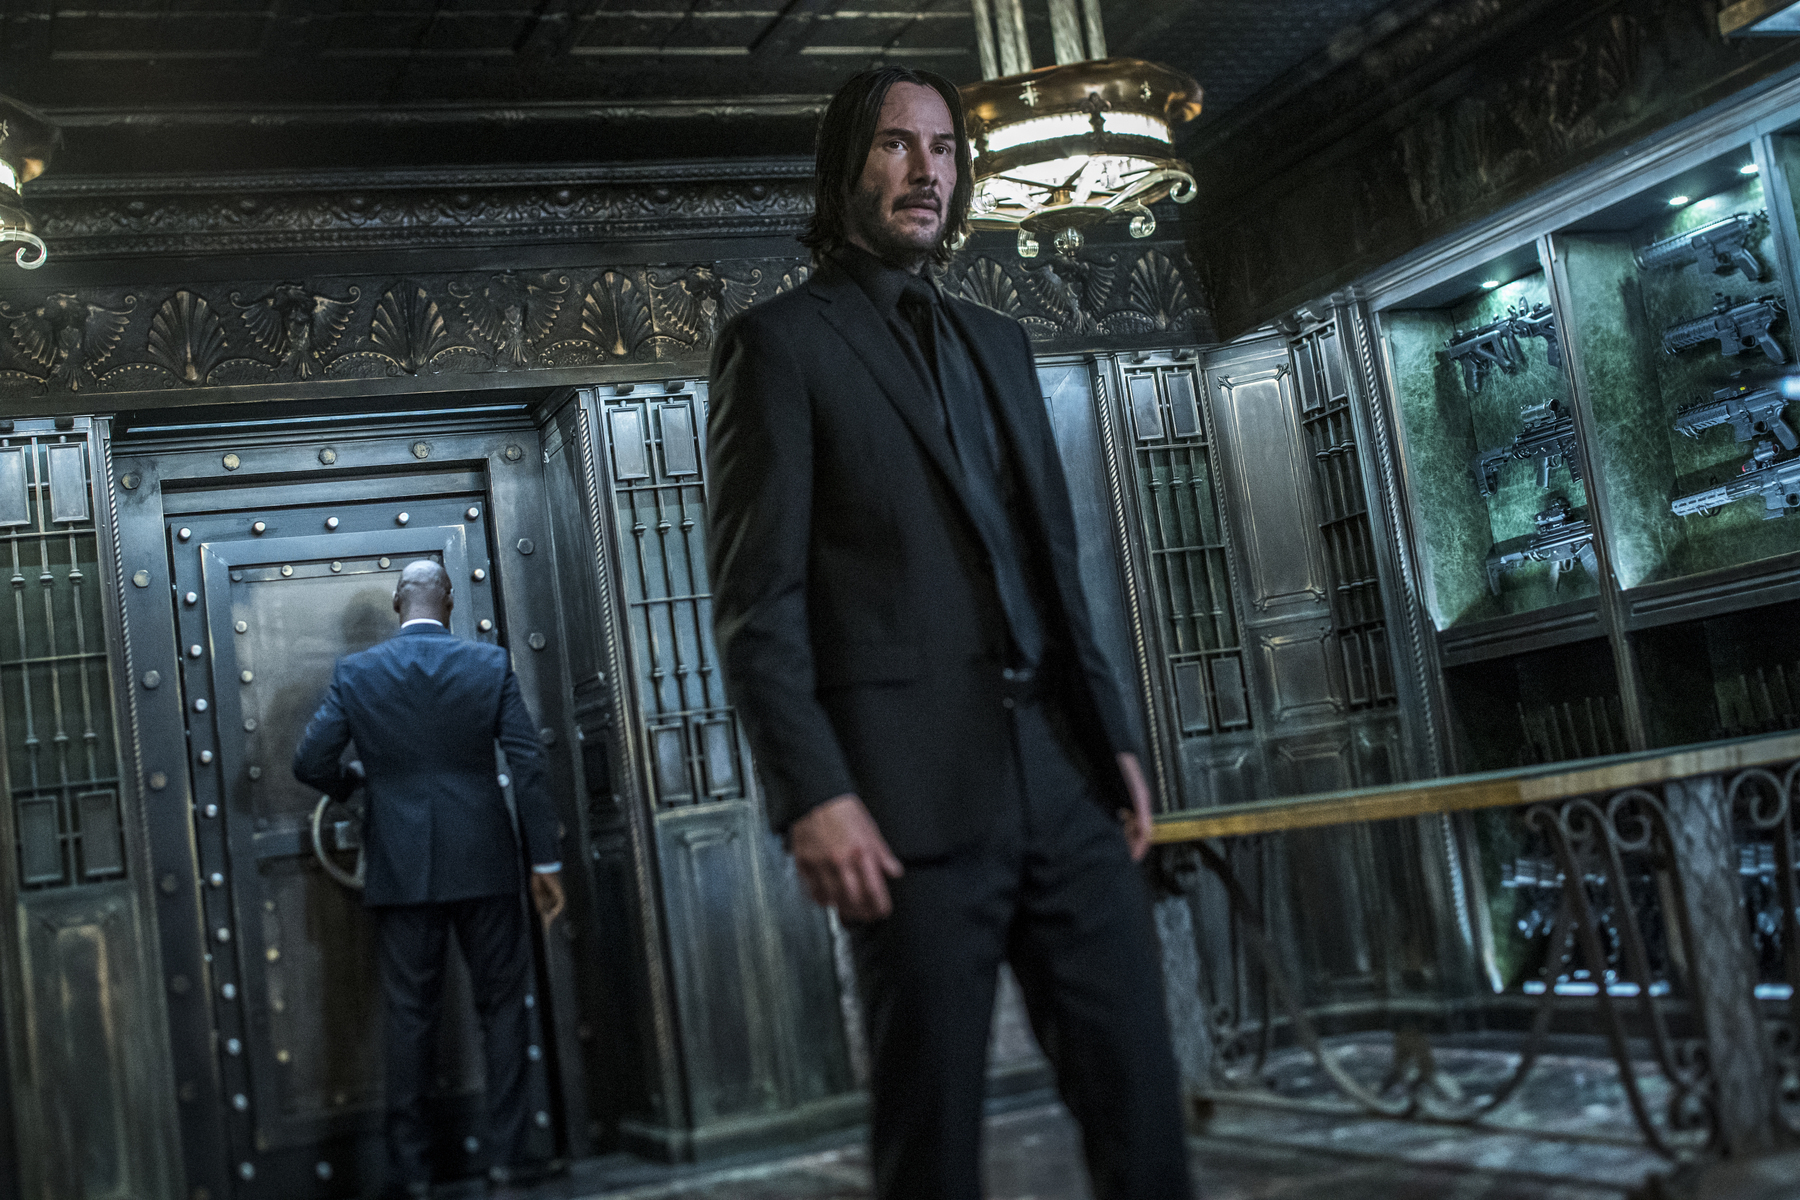 Keanu's hair was much shorter than his John Wick look